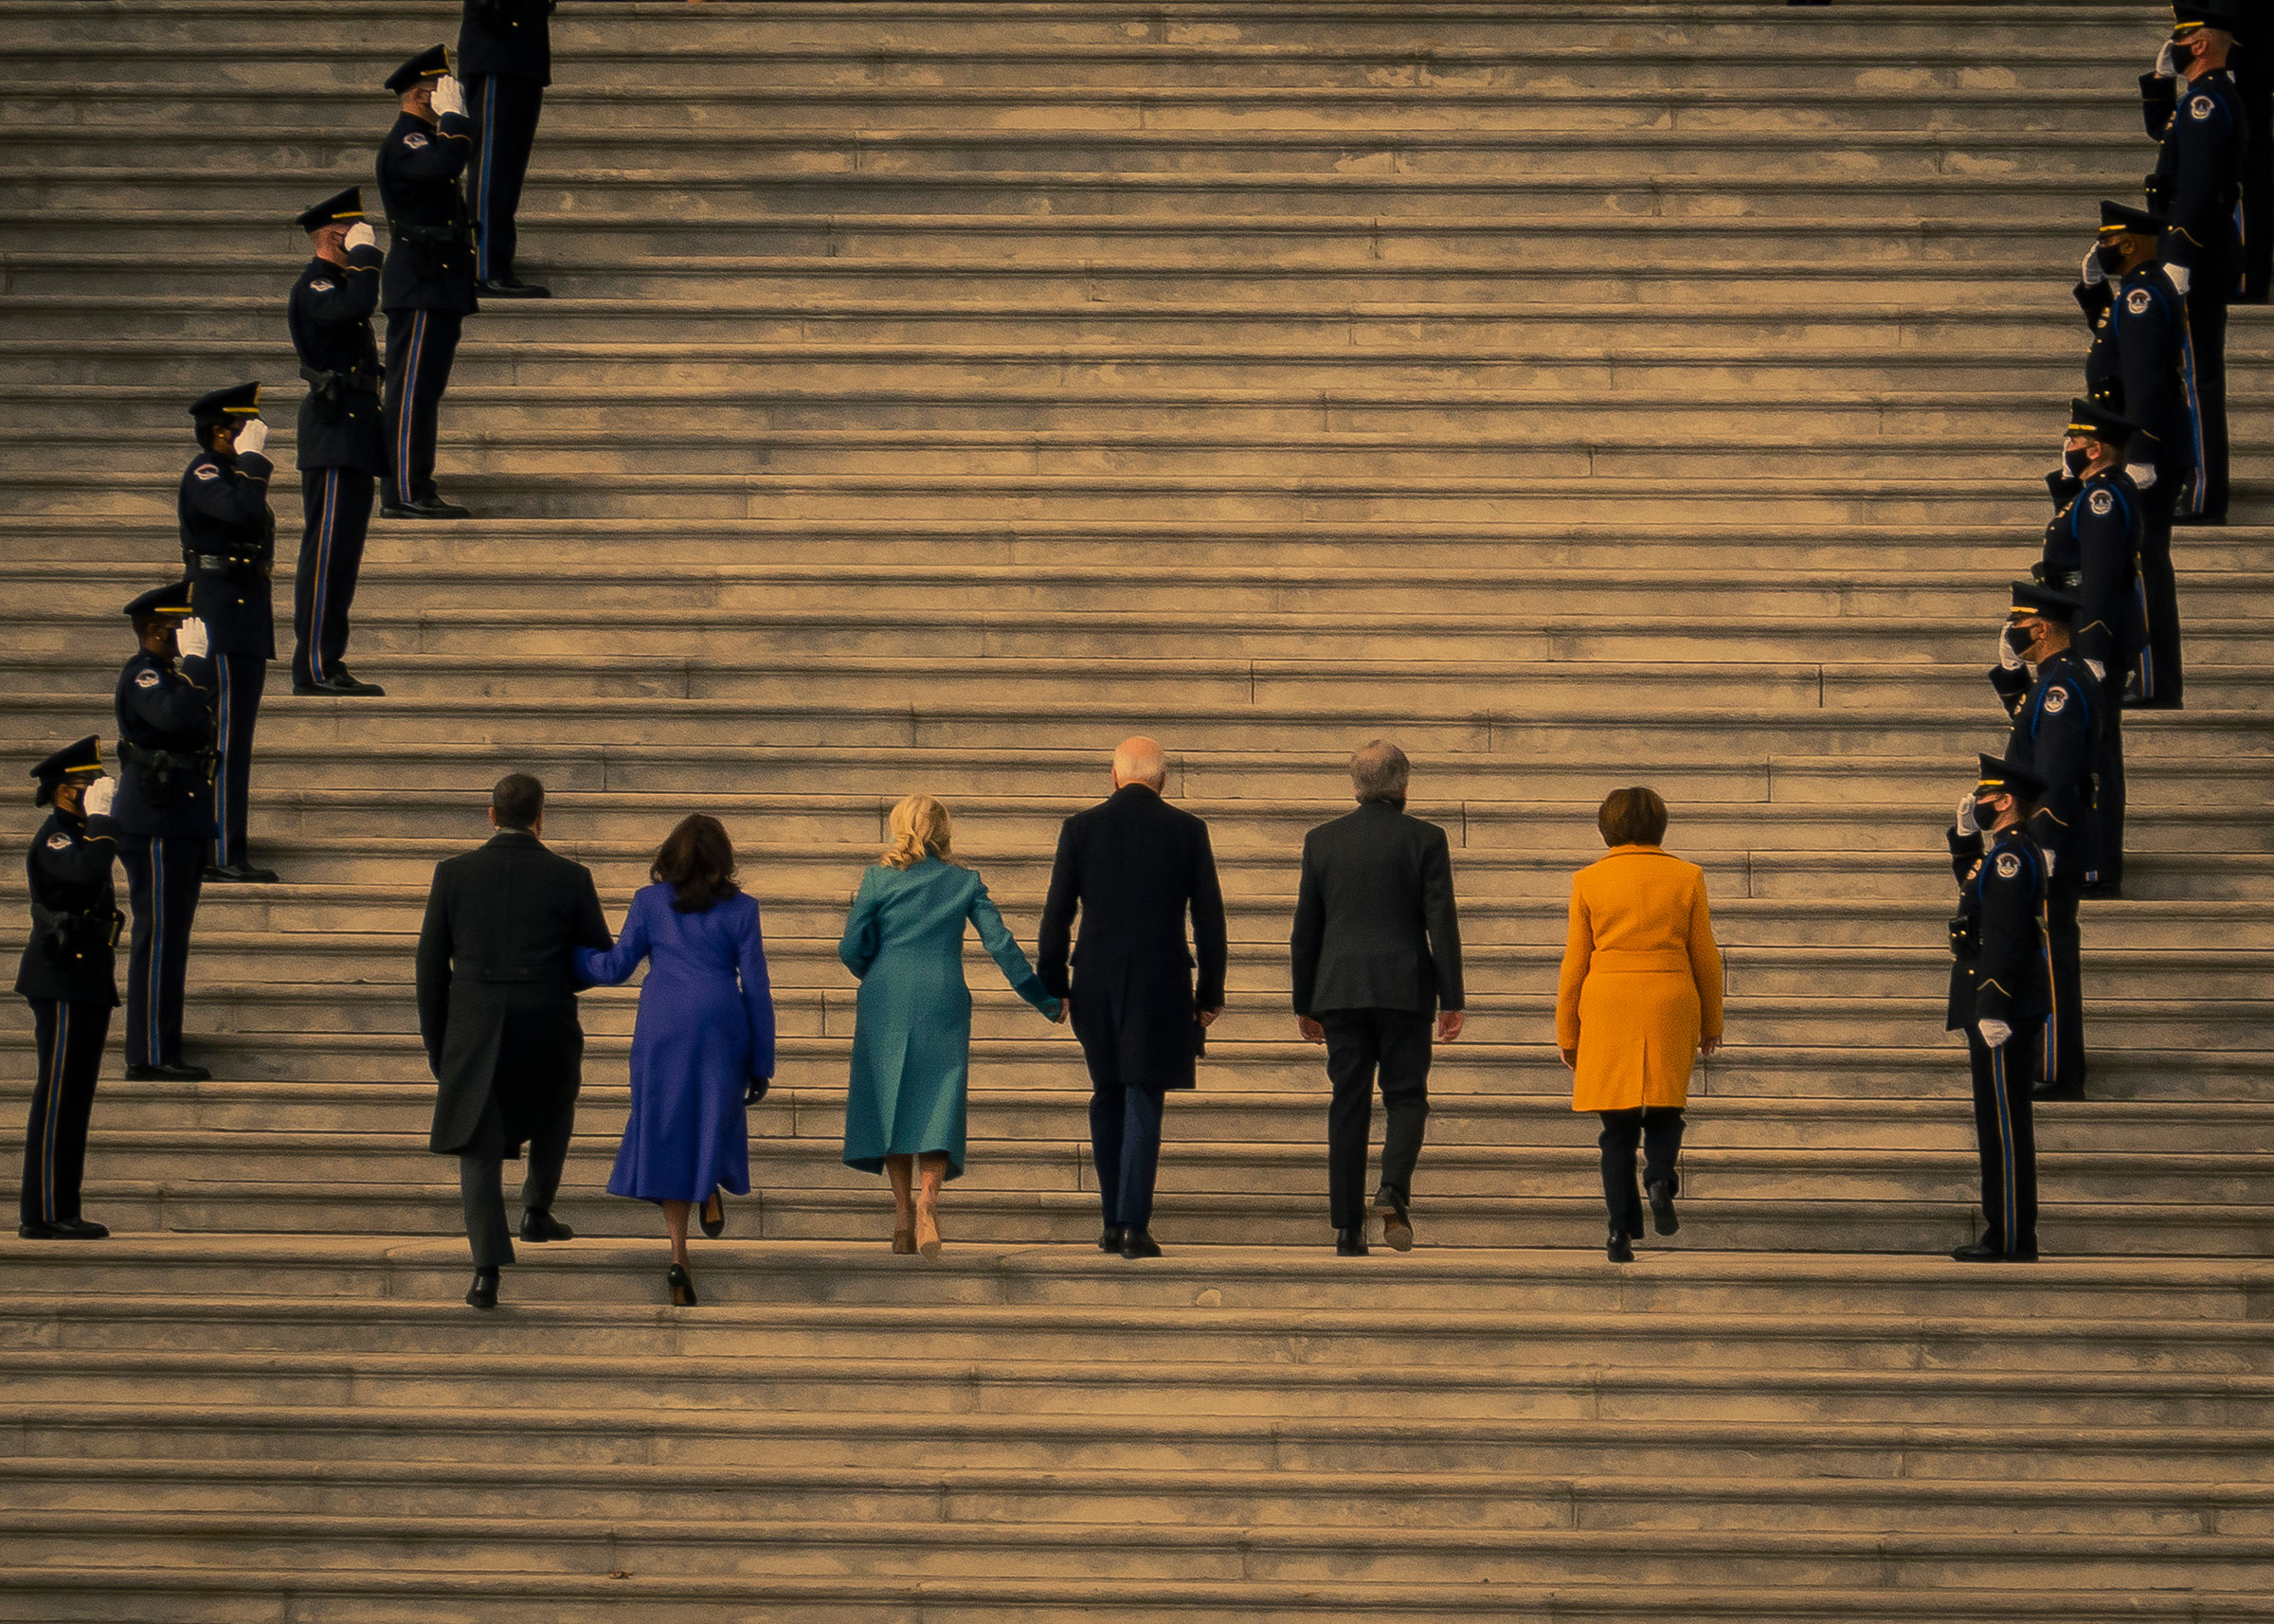 President-elect Joe Biden and Vice President-elect Kamala Harris arrive at the East Front steps of the Capitol prior the 2021 Presidential Inauguration.